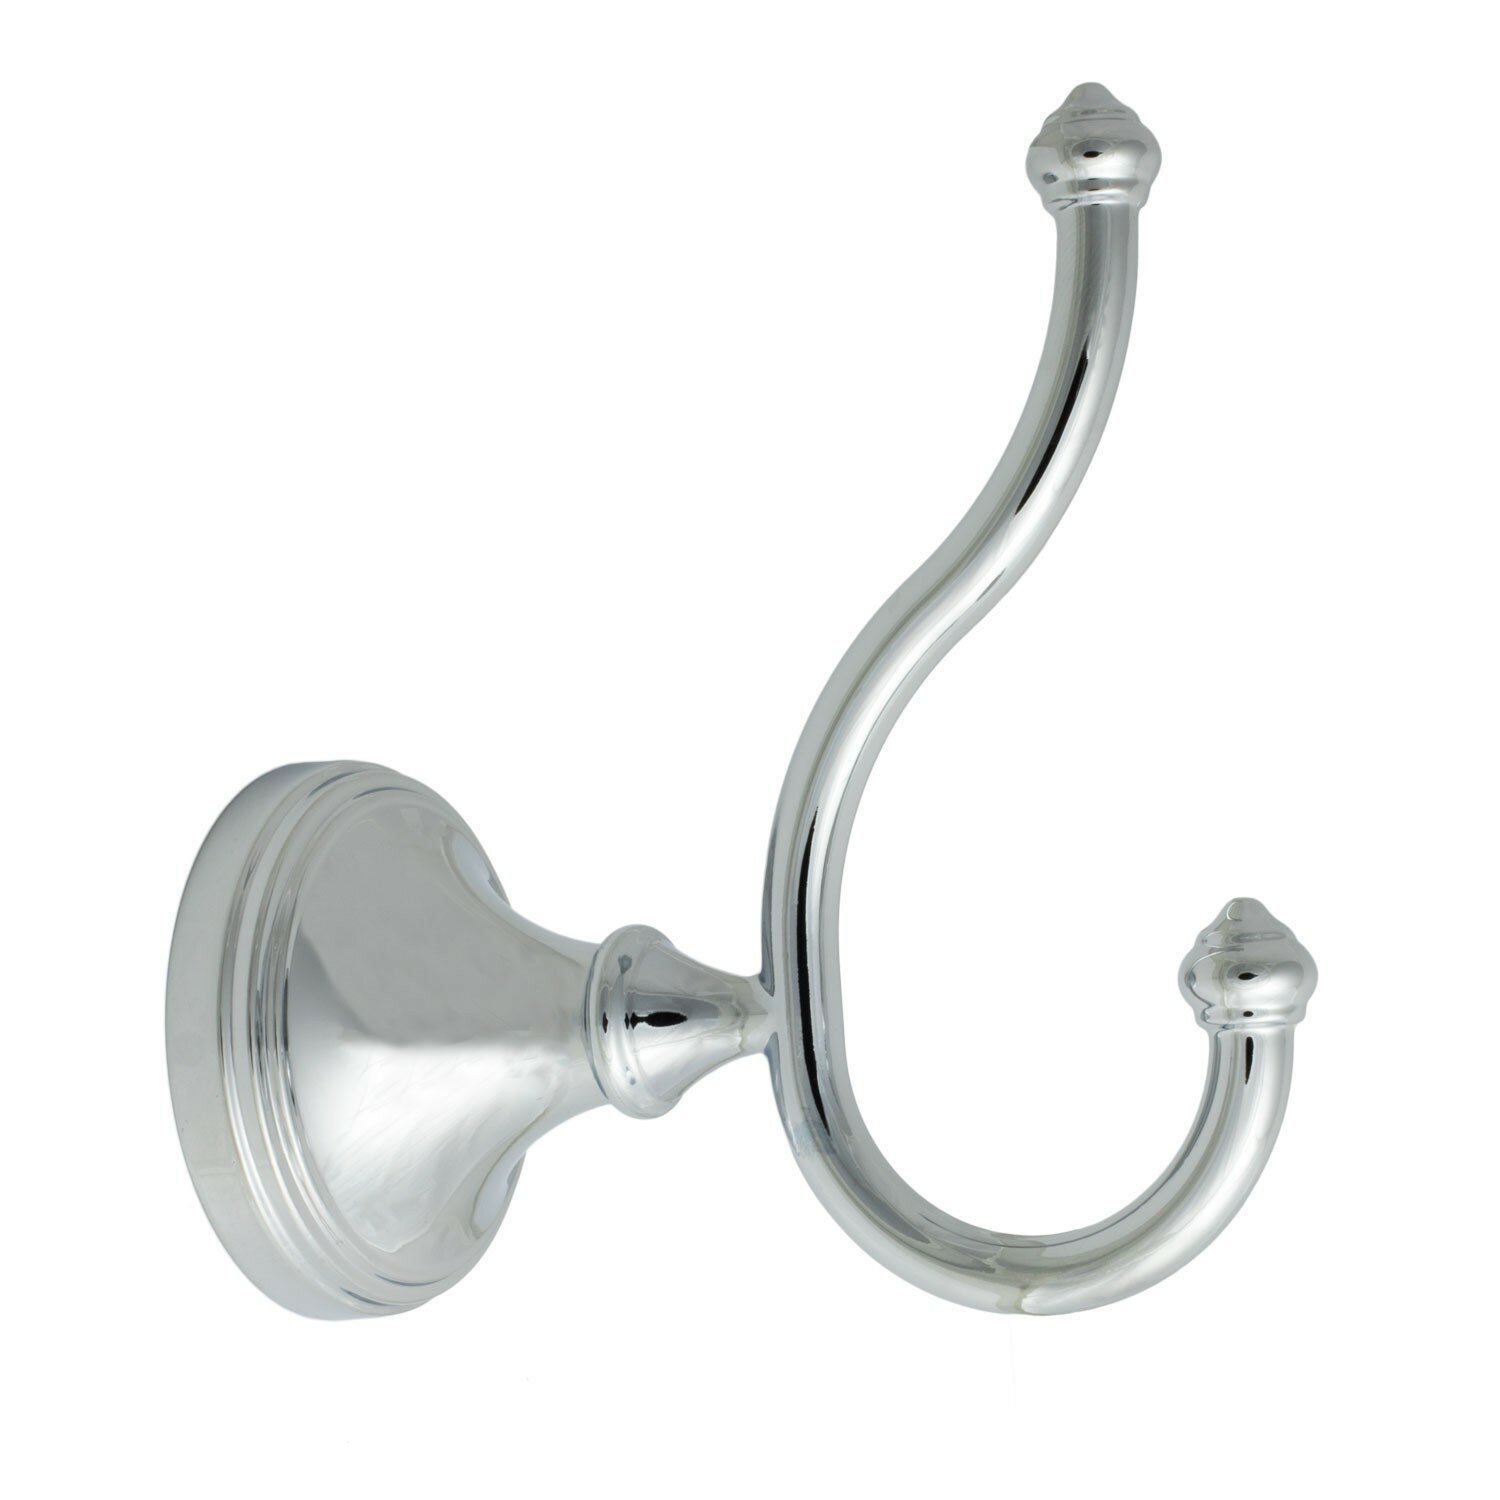 Arista BA5301-RHKJ-CH Annchester Wall Mounted Double J Style Robe Hook